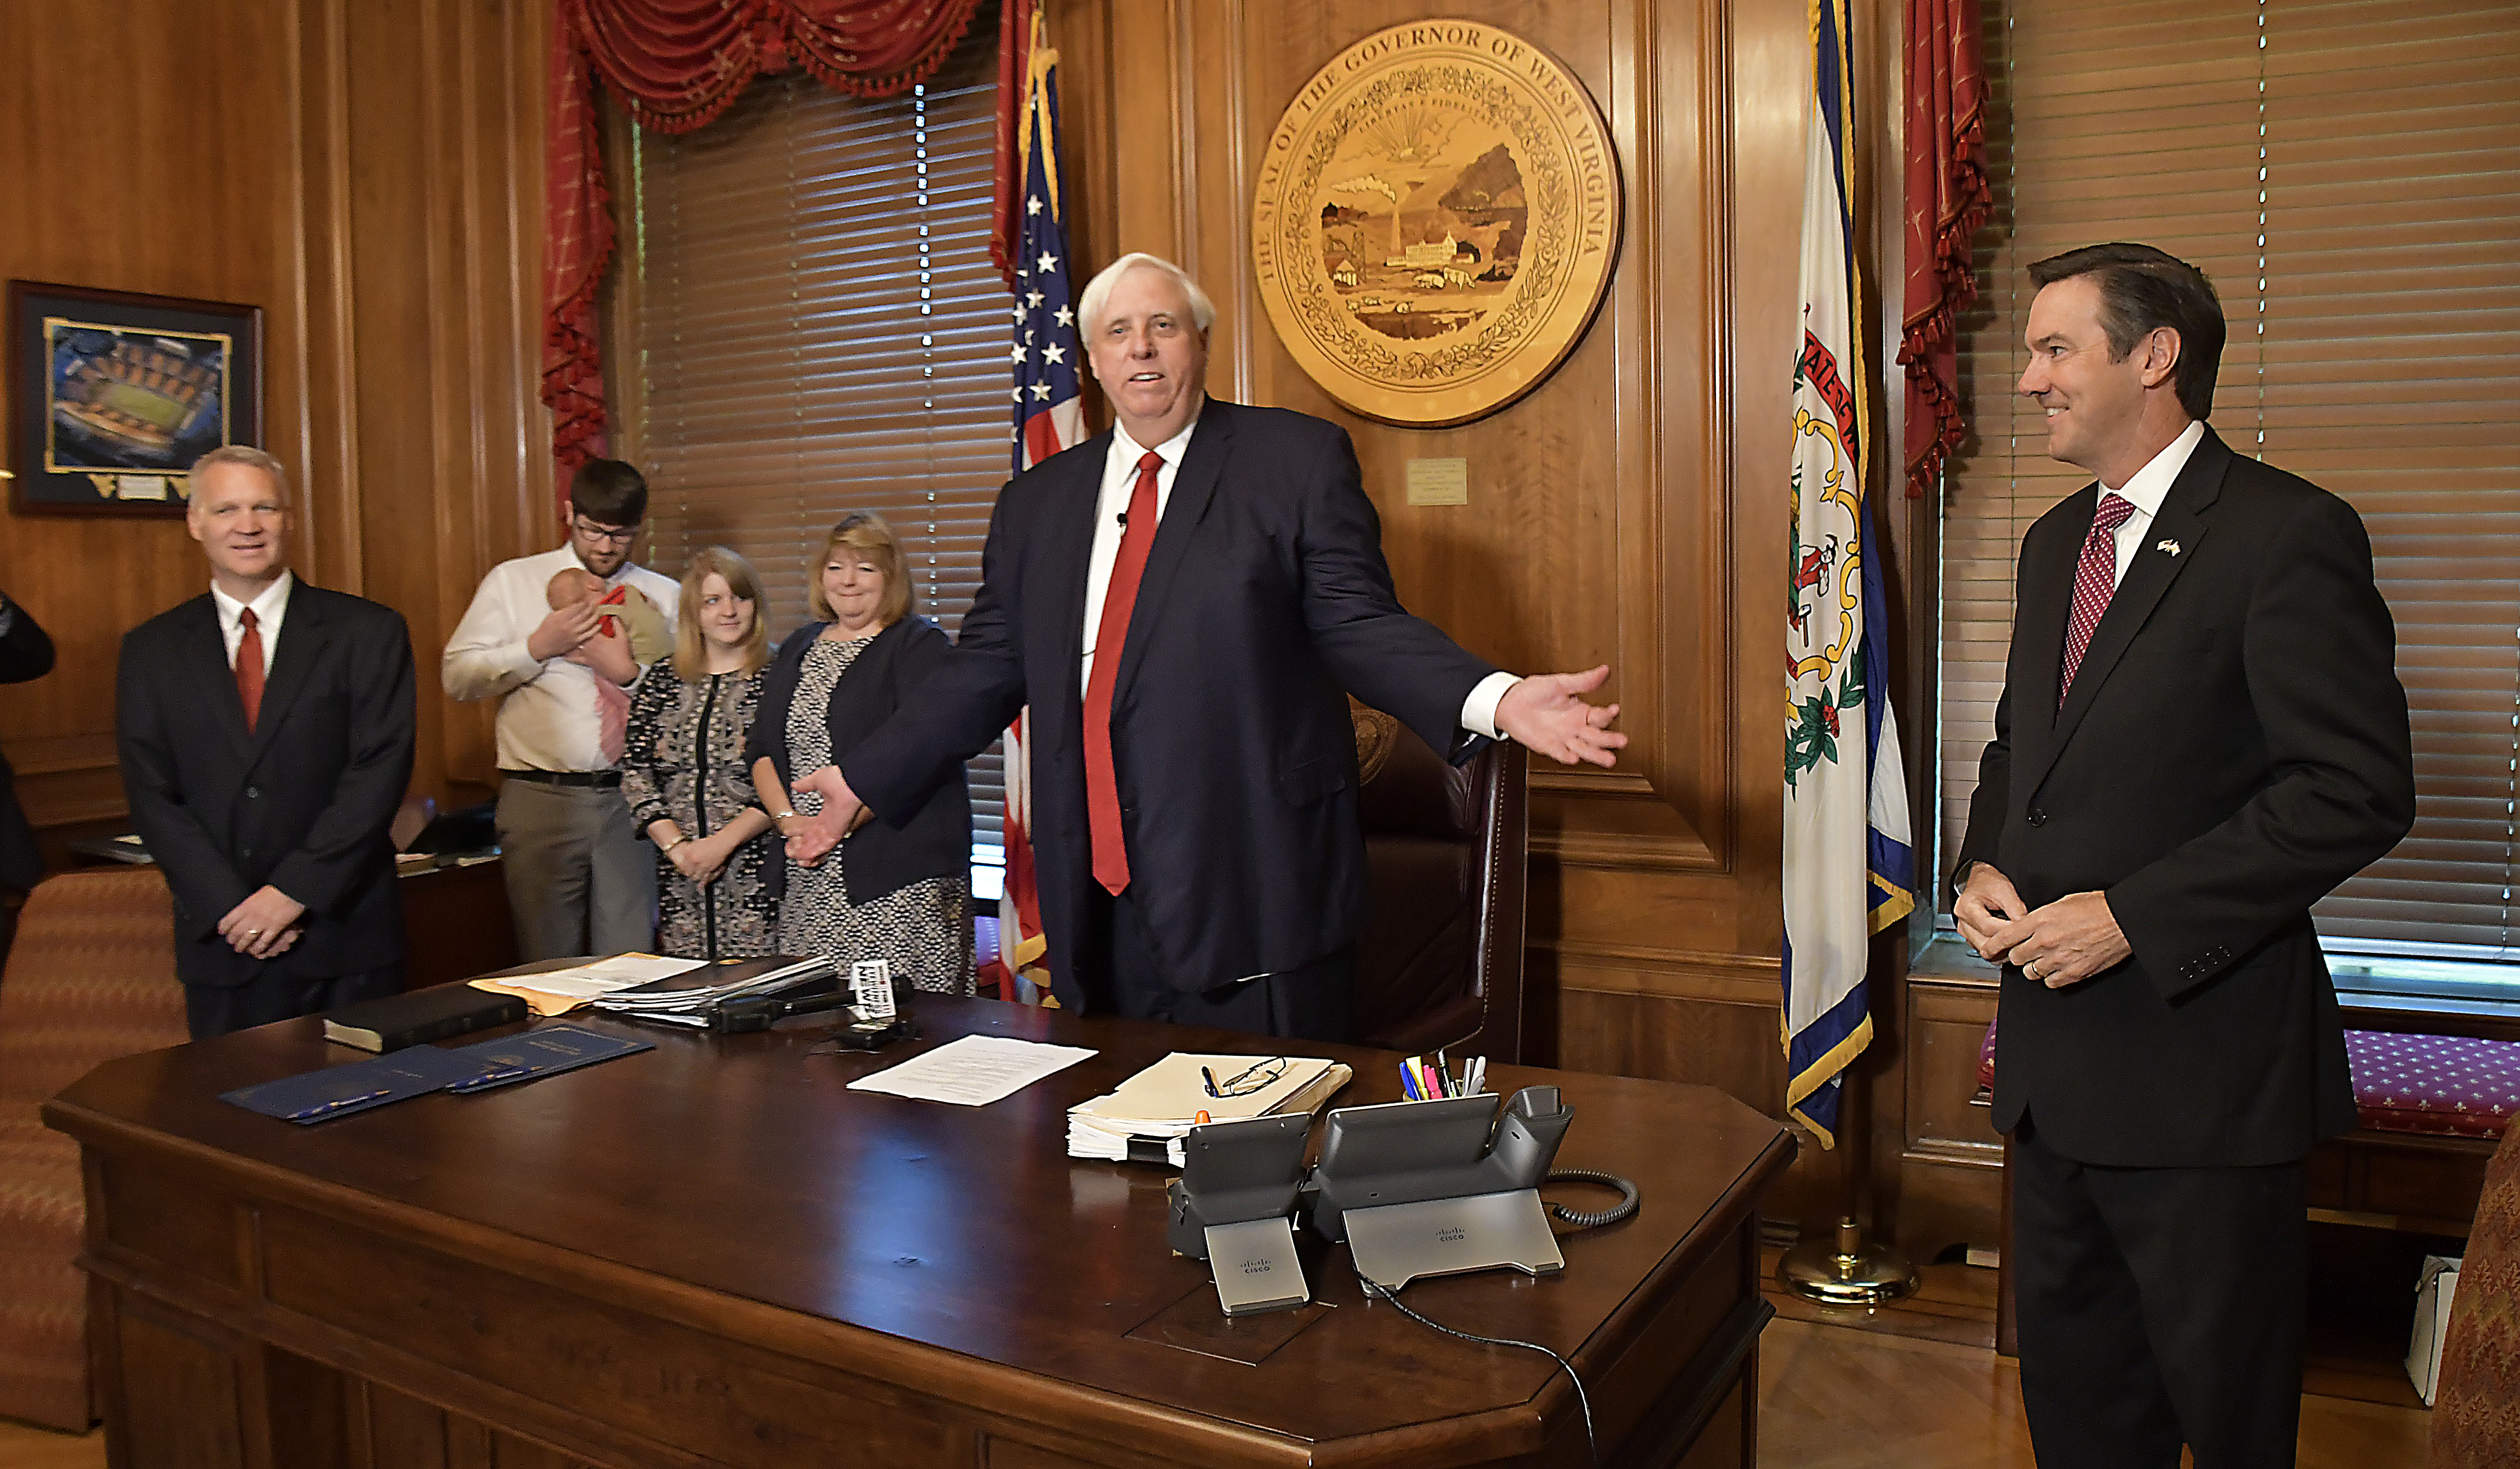 West Virginia Gov. Jim Justice announces the appointment of Evan Jenkins and Tim Armstead to the state Supreme Court (Accessed via Flickr creative commons)